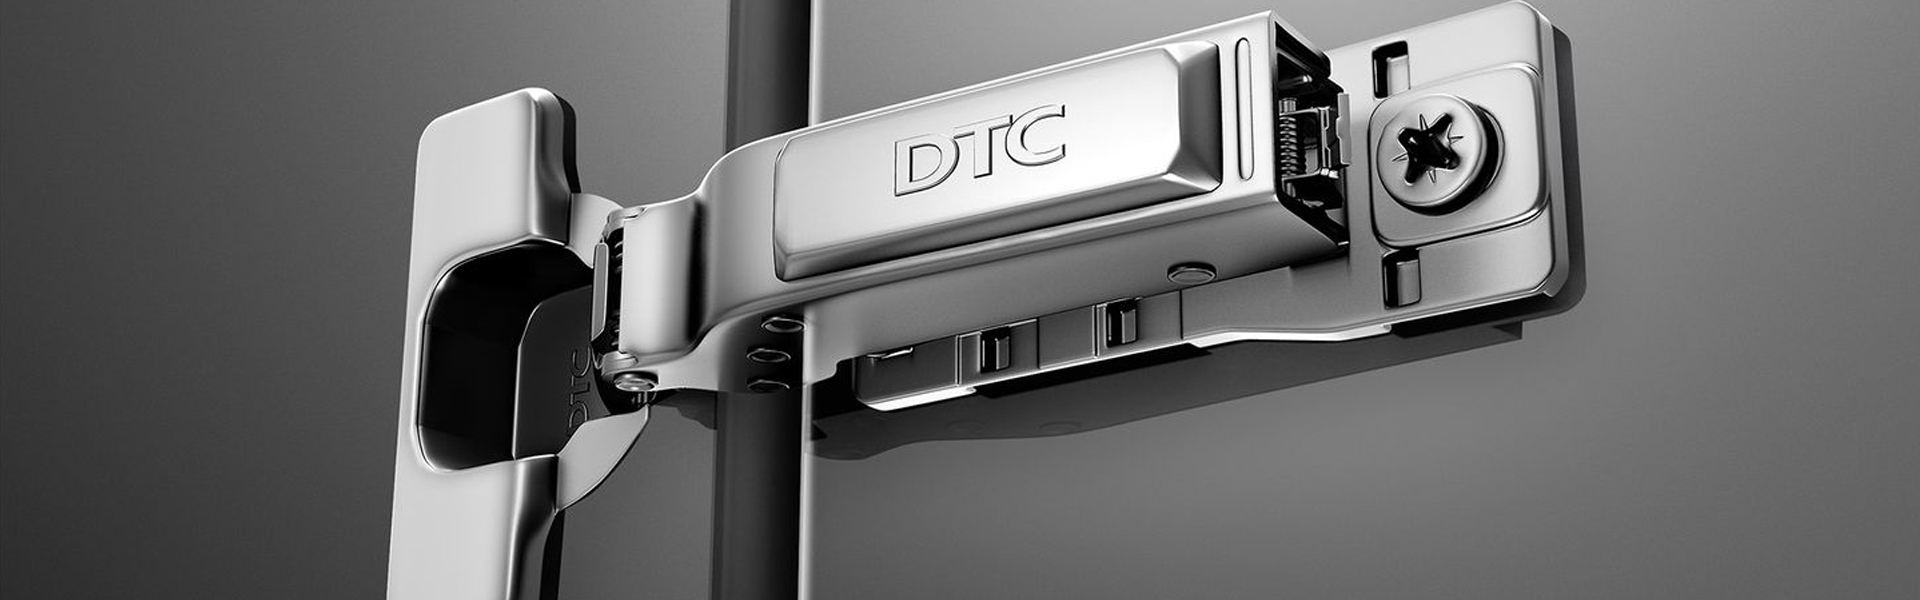 dtc,hardware,drawer systems,hinge,lifting systems,sliding door systems